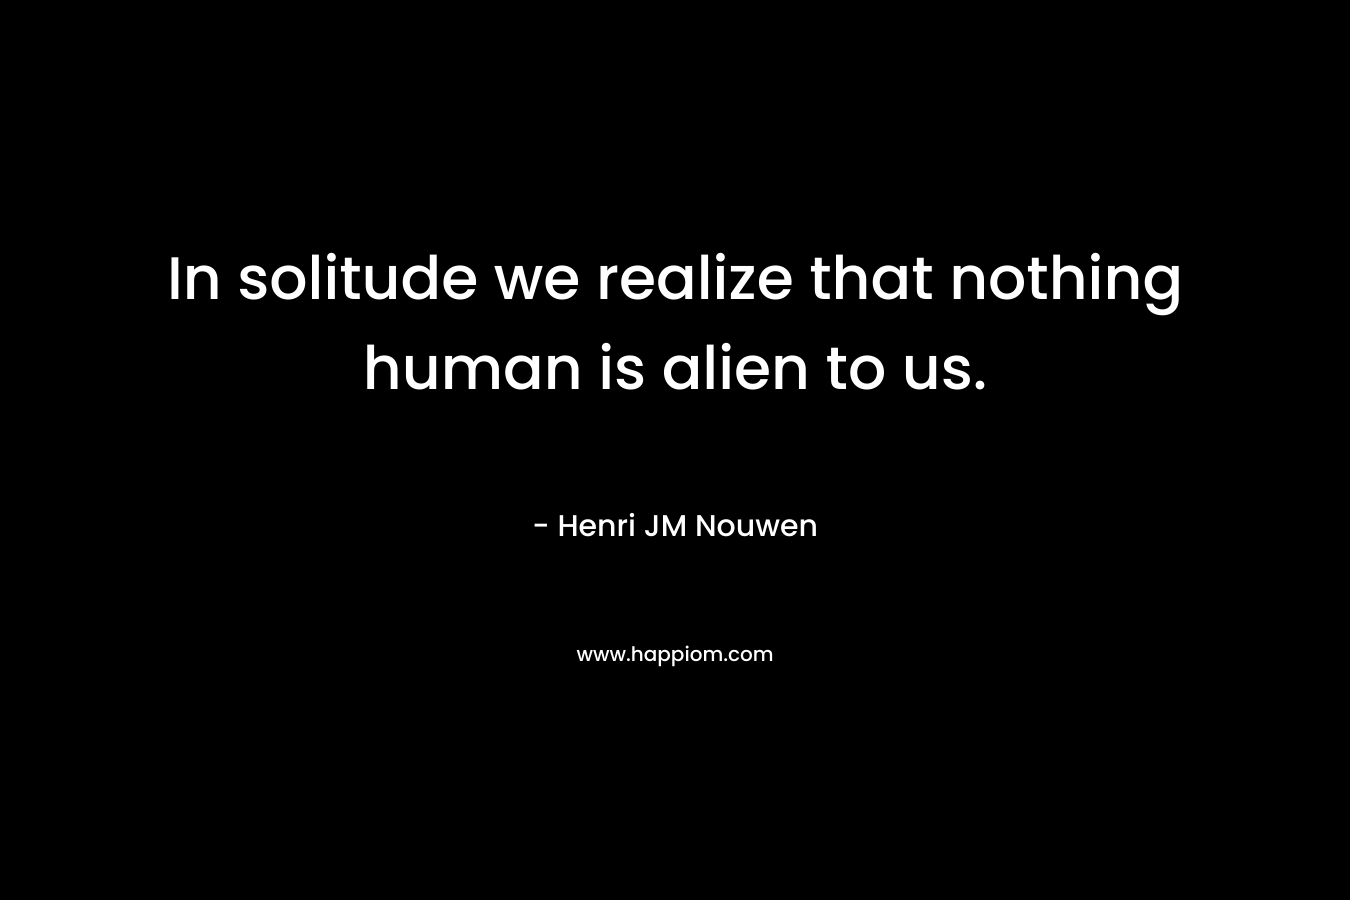 In solitude we realize that nothing human is alien to us.